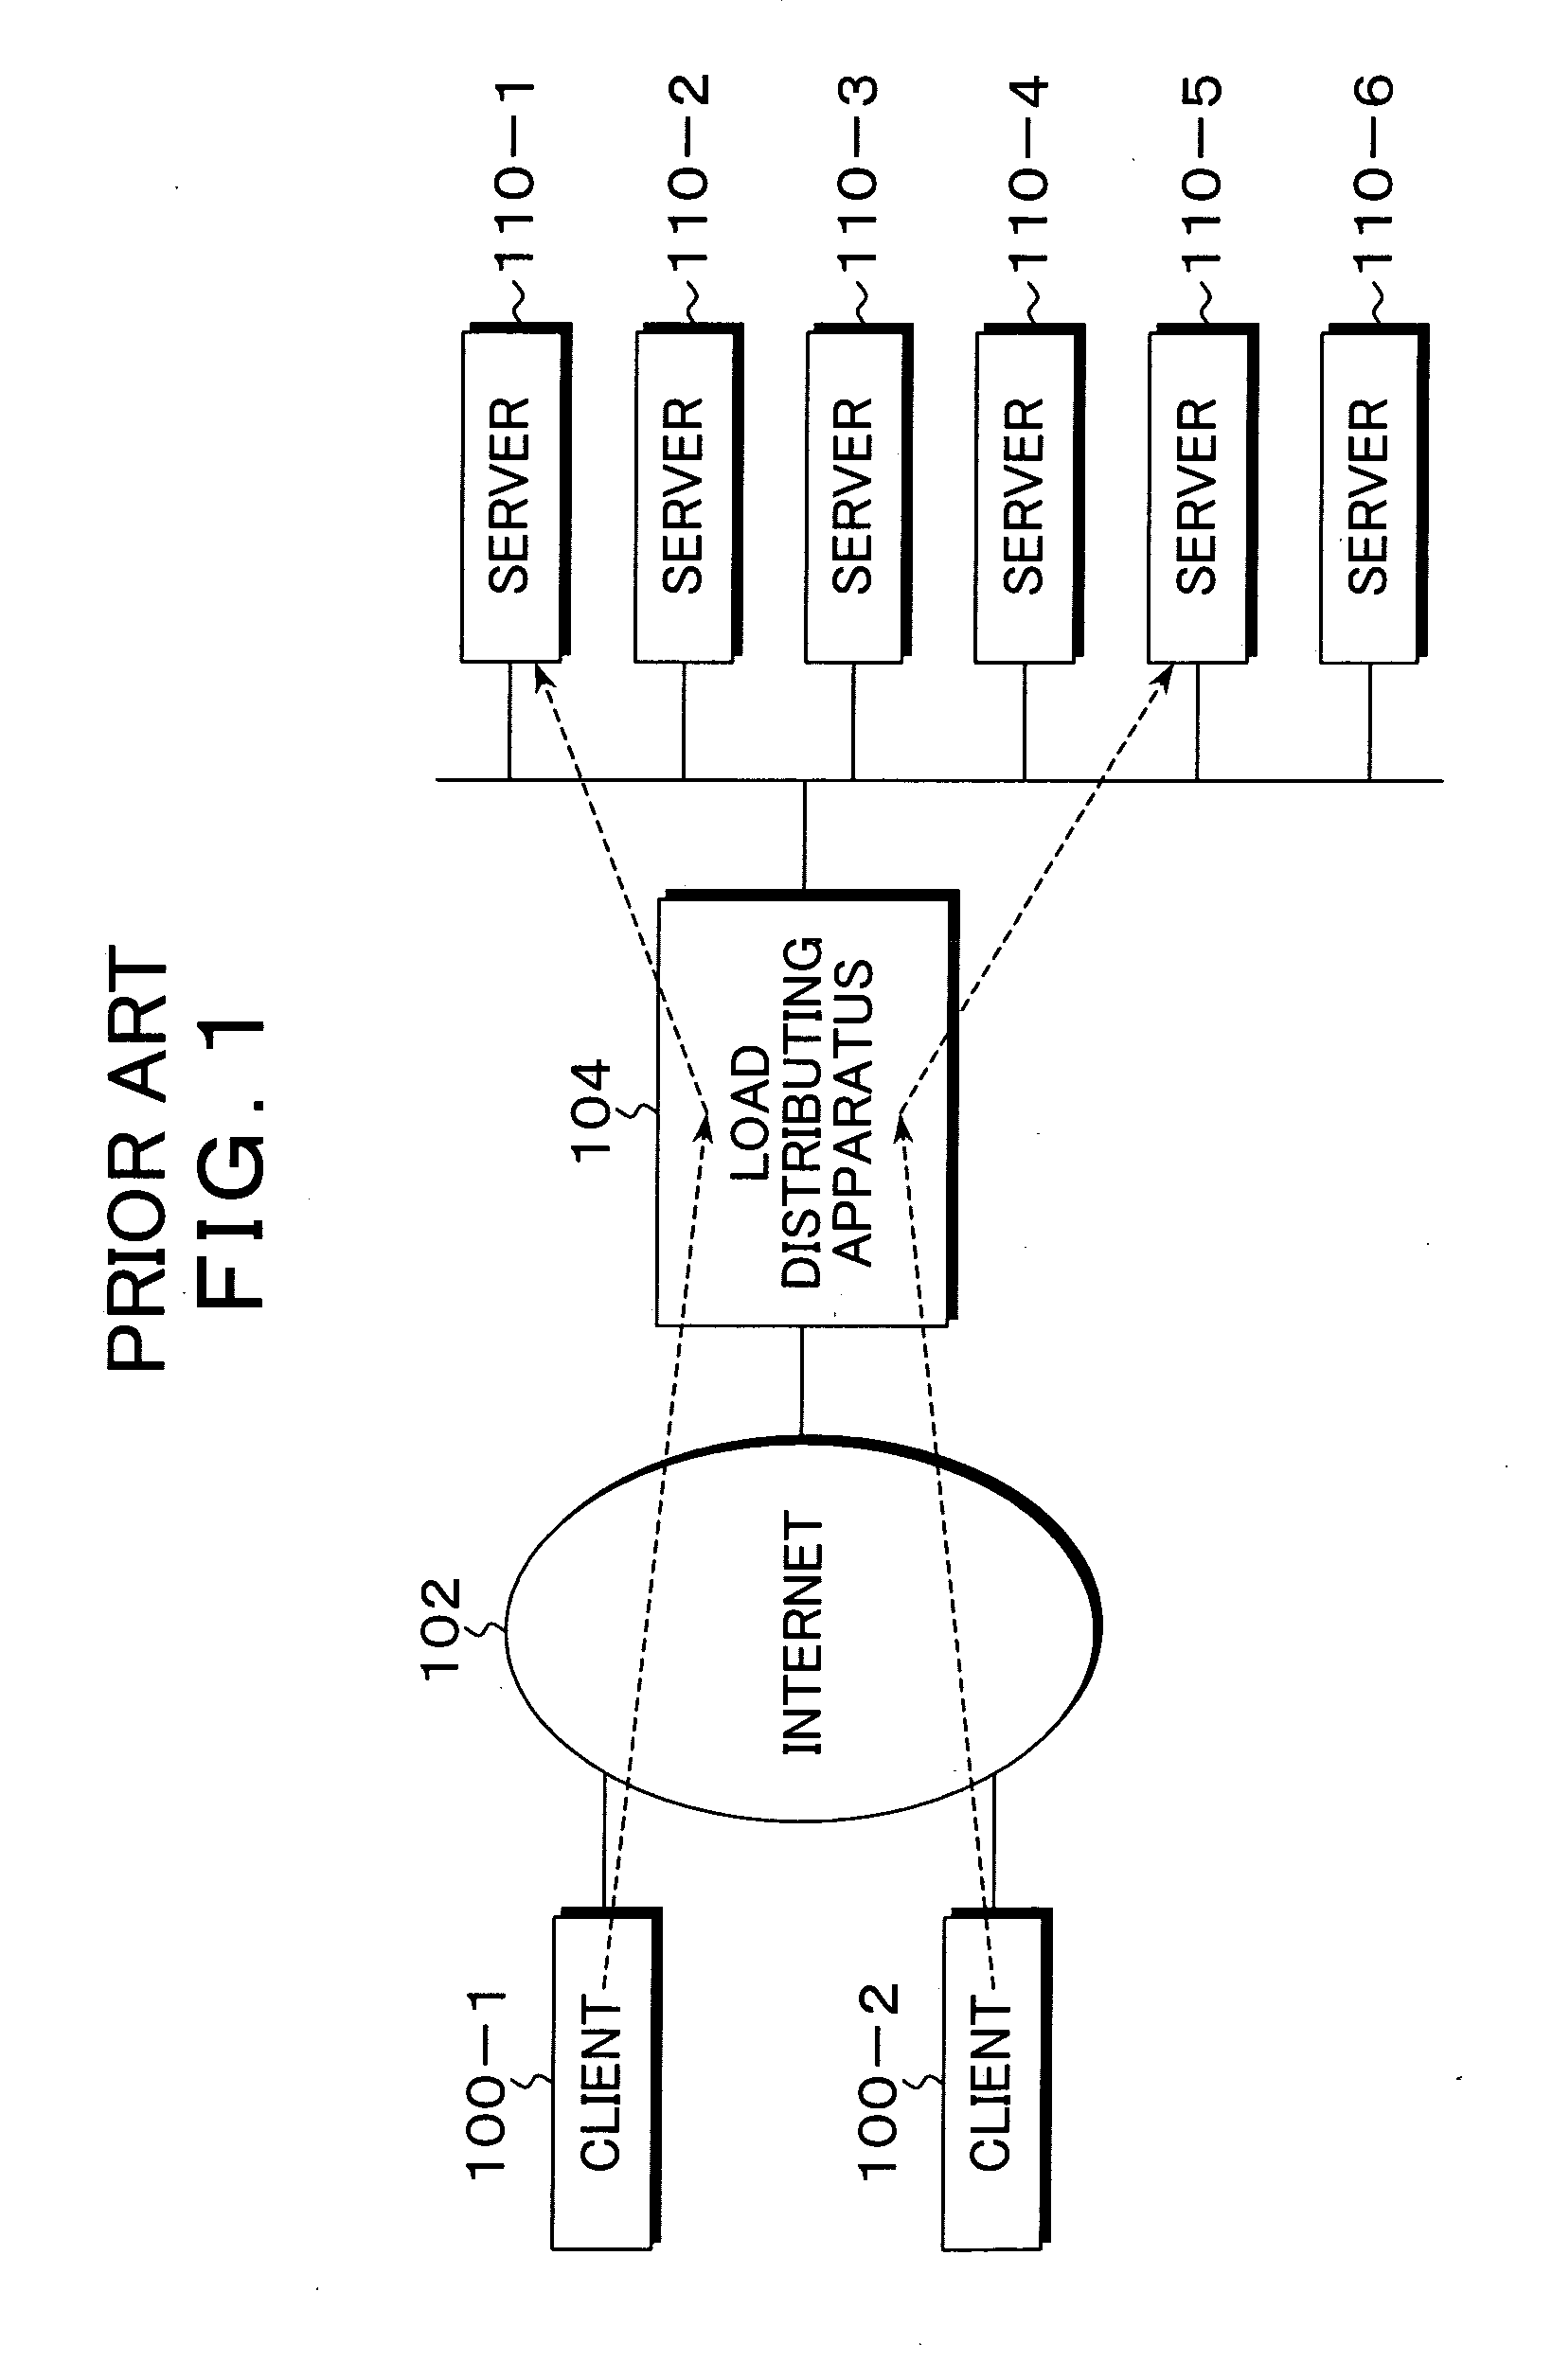 Multi-stage load distributing apparatus and method, and program